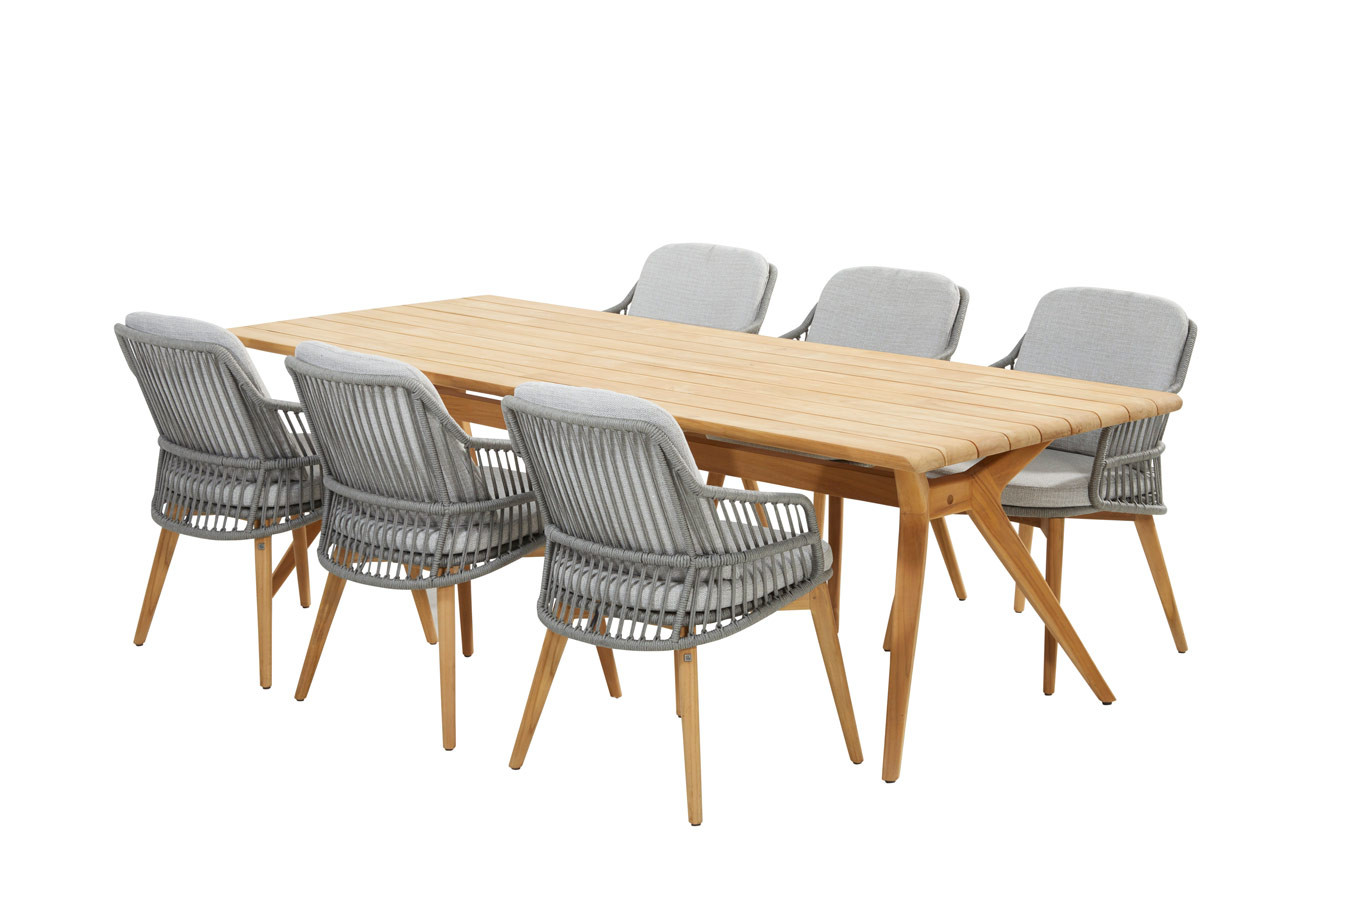 Sempre dining teak with Belair dining table